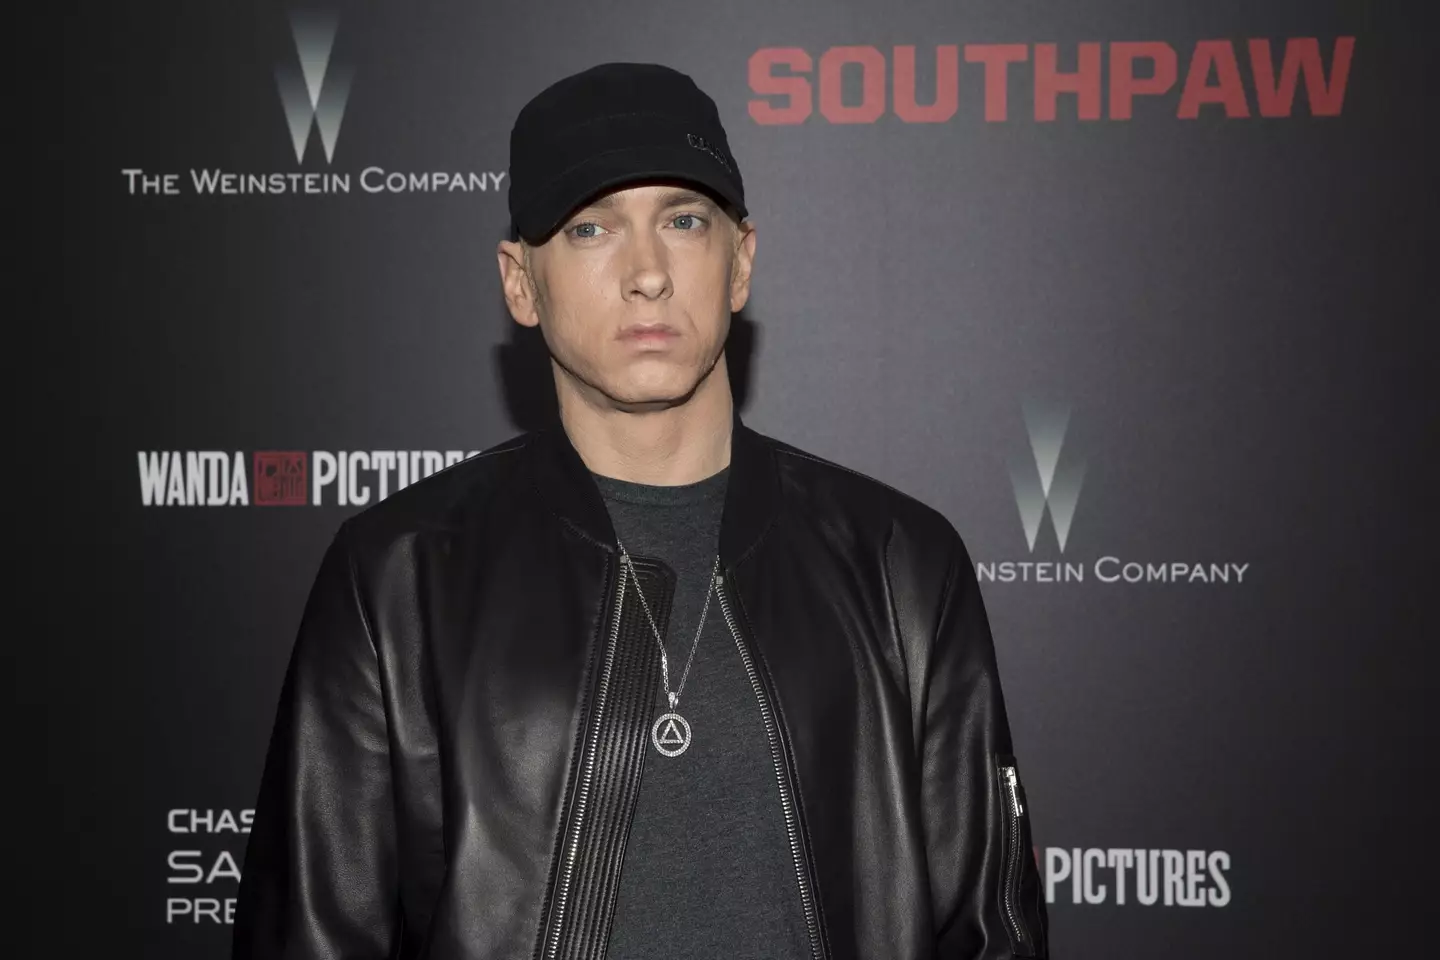 Eminem regrets going so hard on his mother in the song 'Cleanin' Out My Closet'.